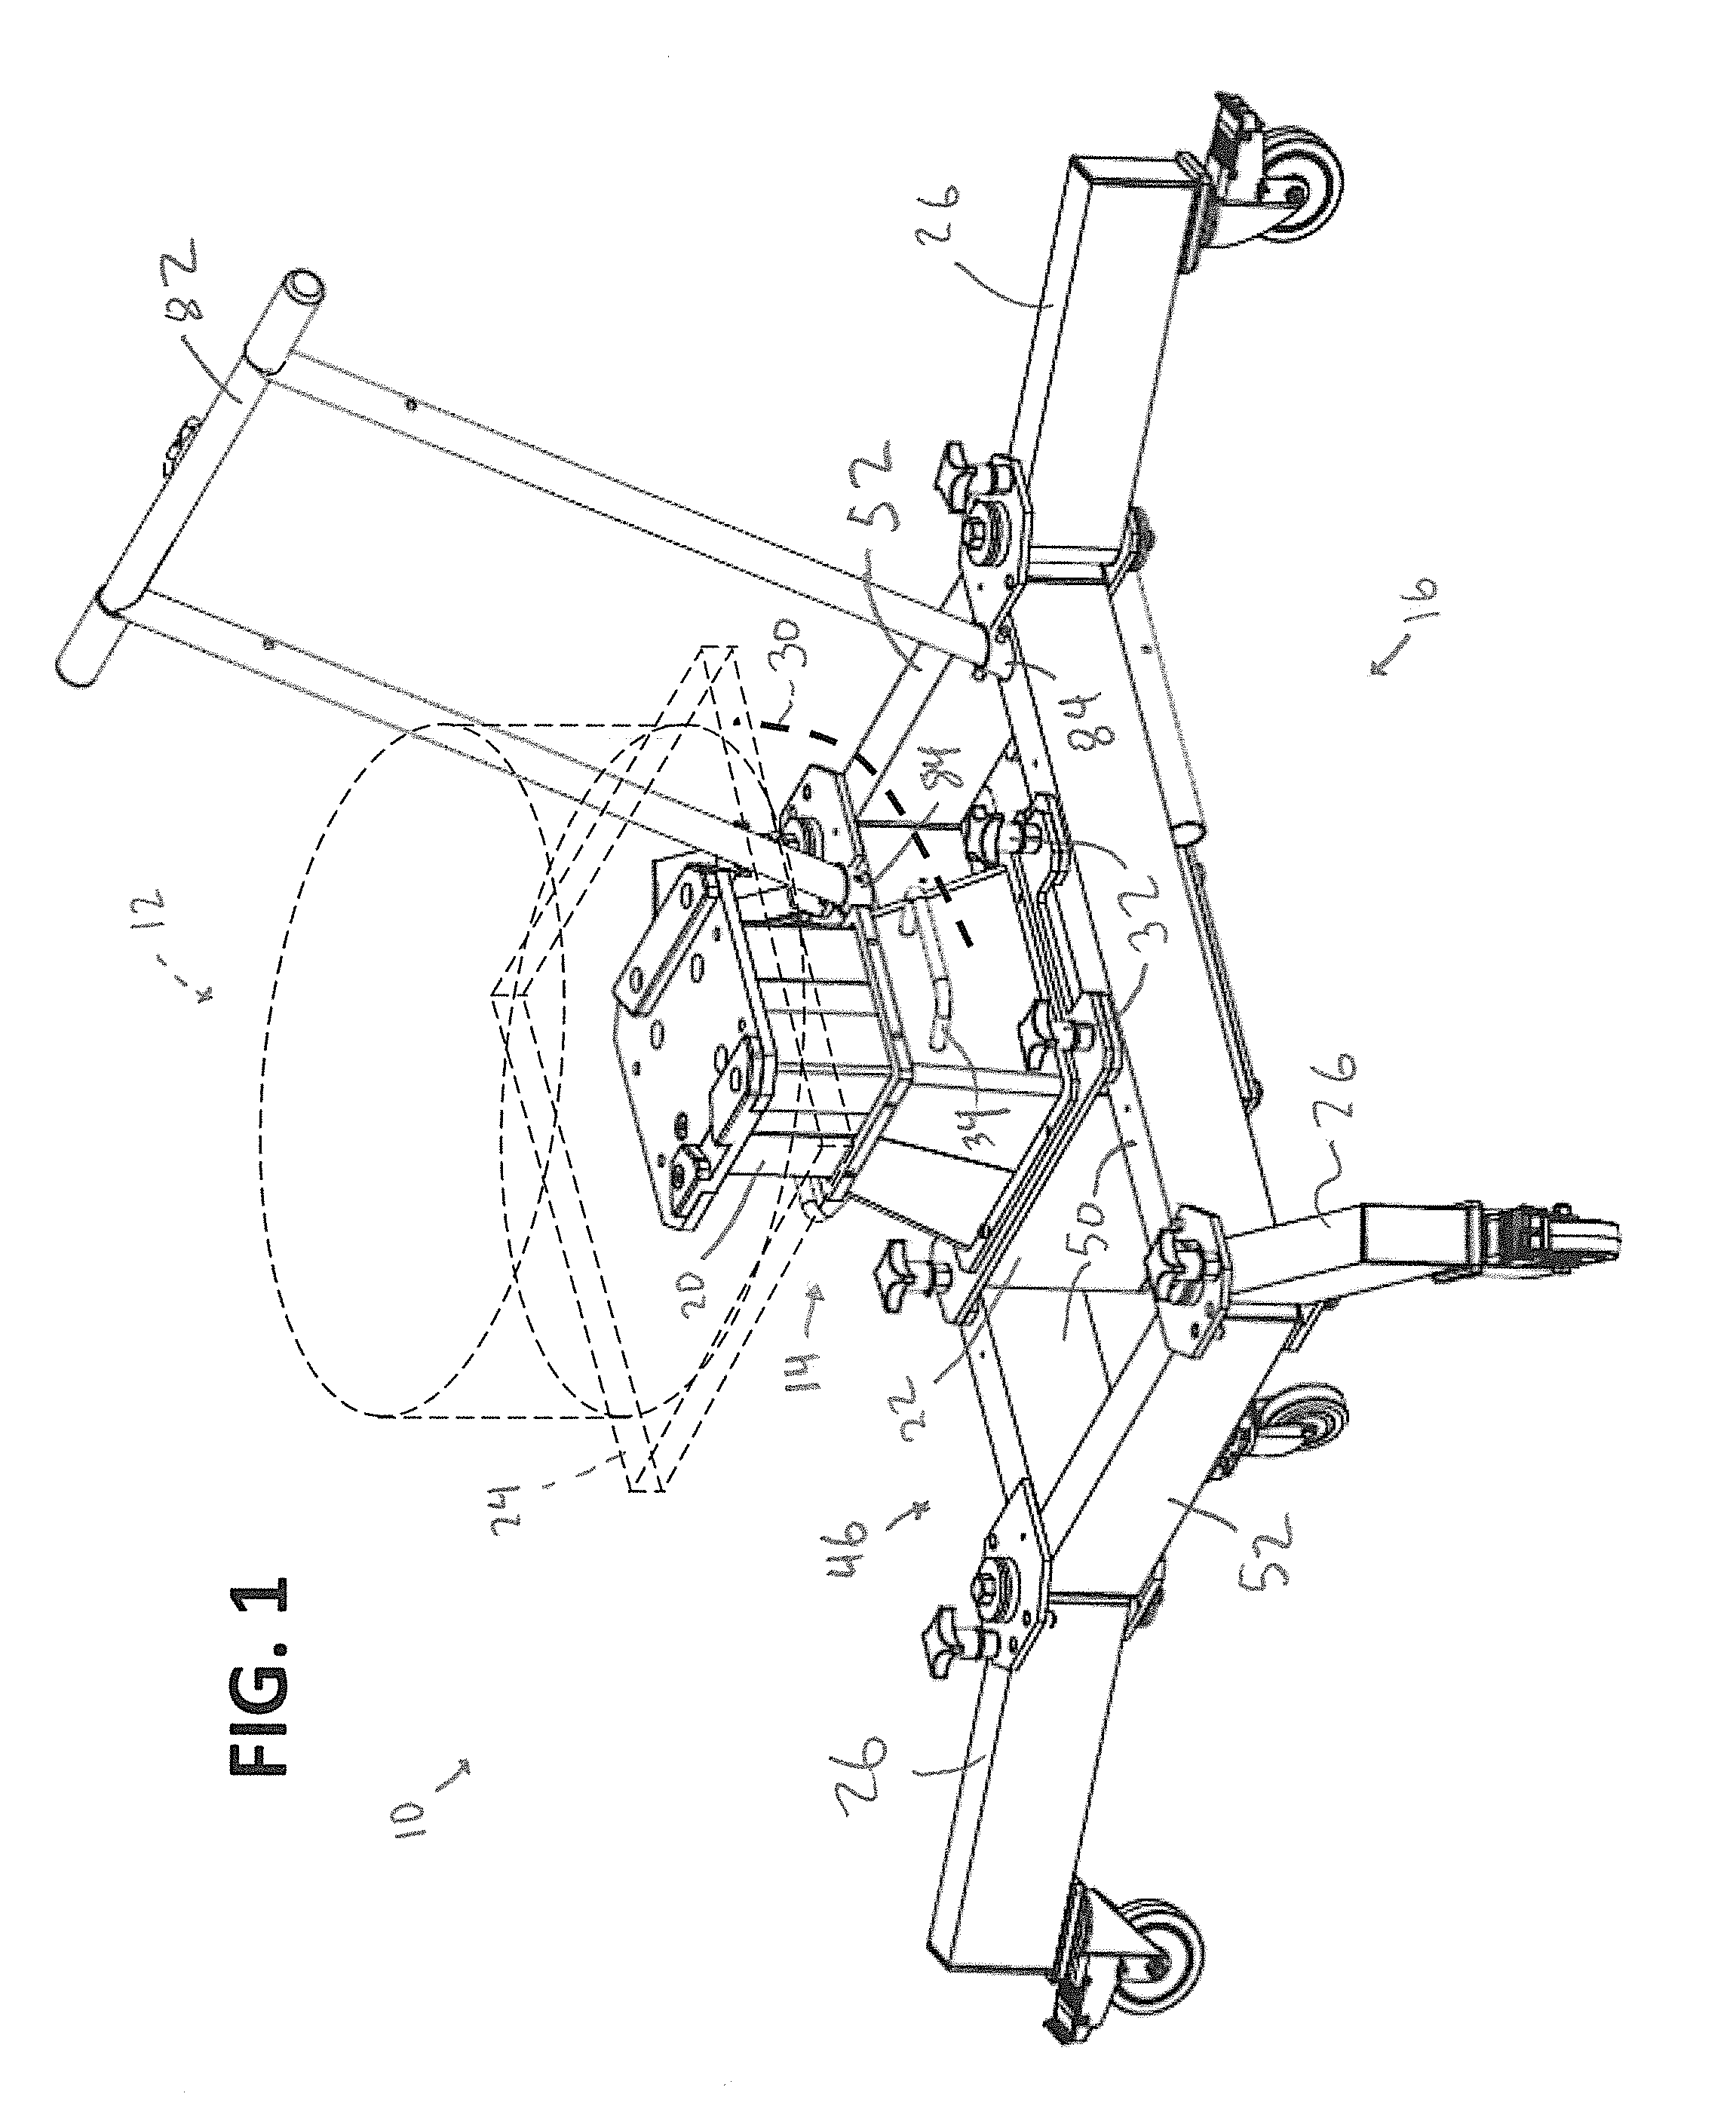 Support apparatus for radiotherapy measurement system